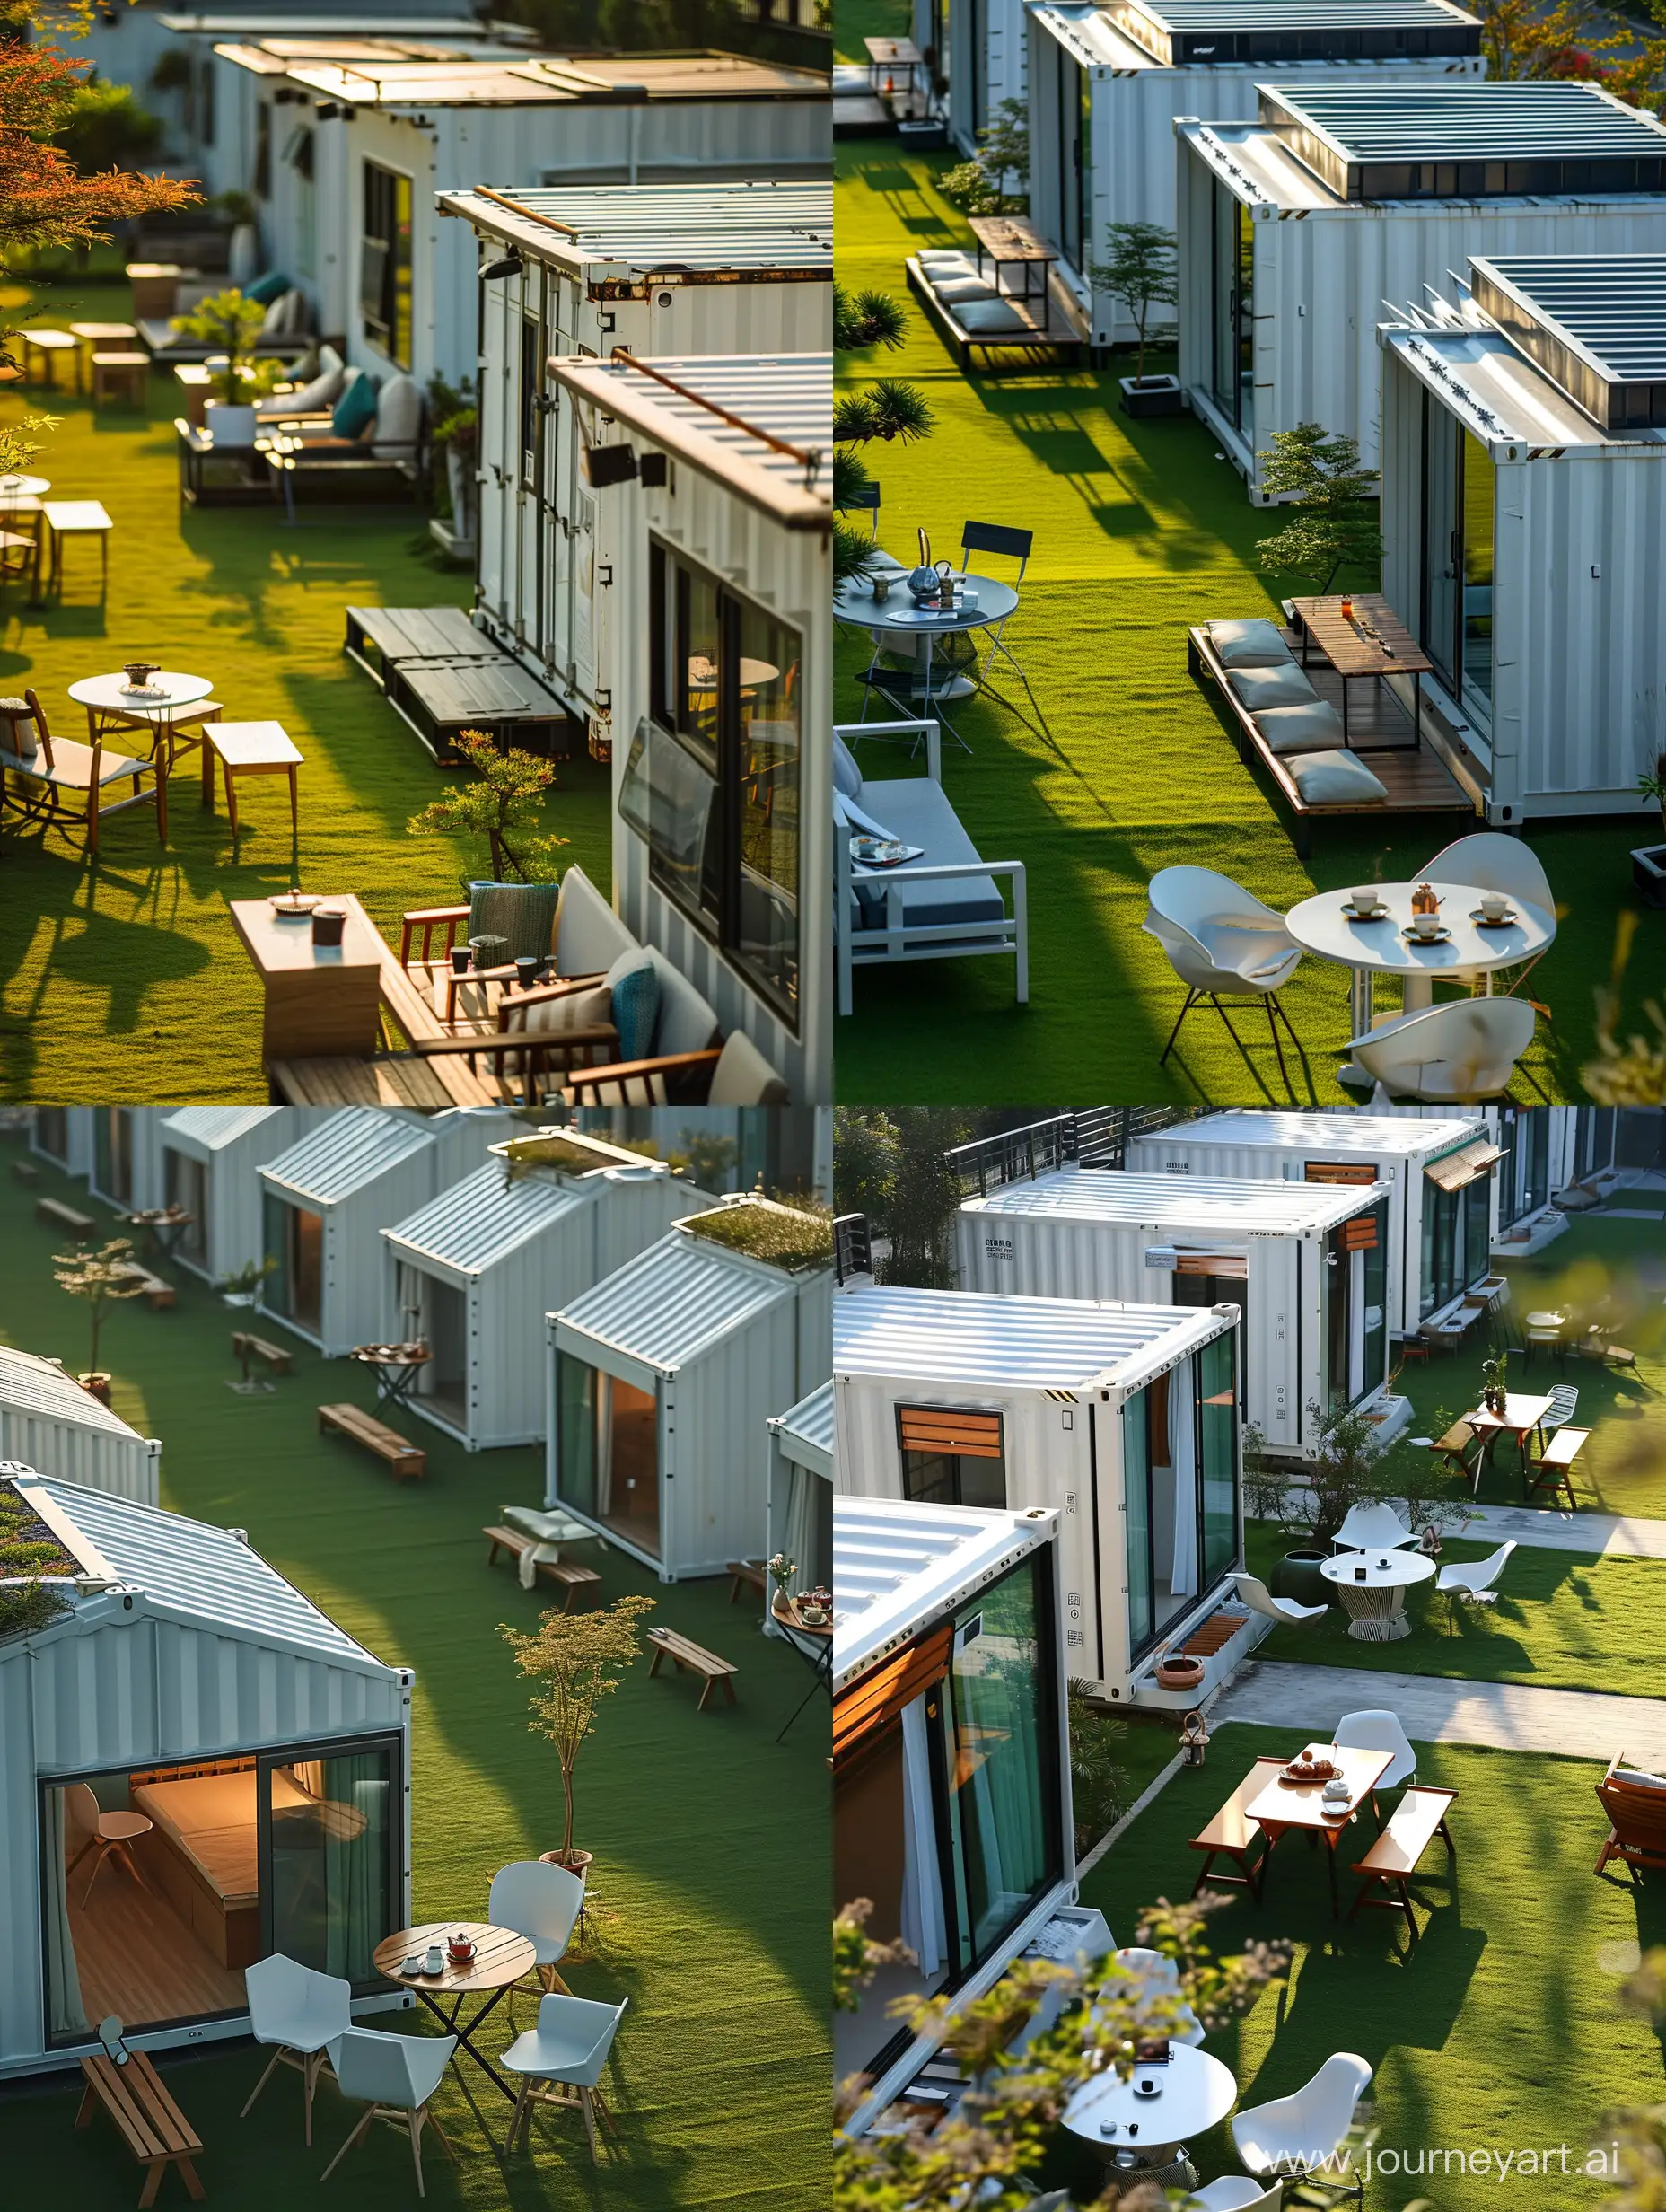 Sunlit-White-Container-Lodgings-with-Terrace-Roofs-and-Tea-Tables